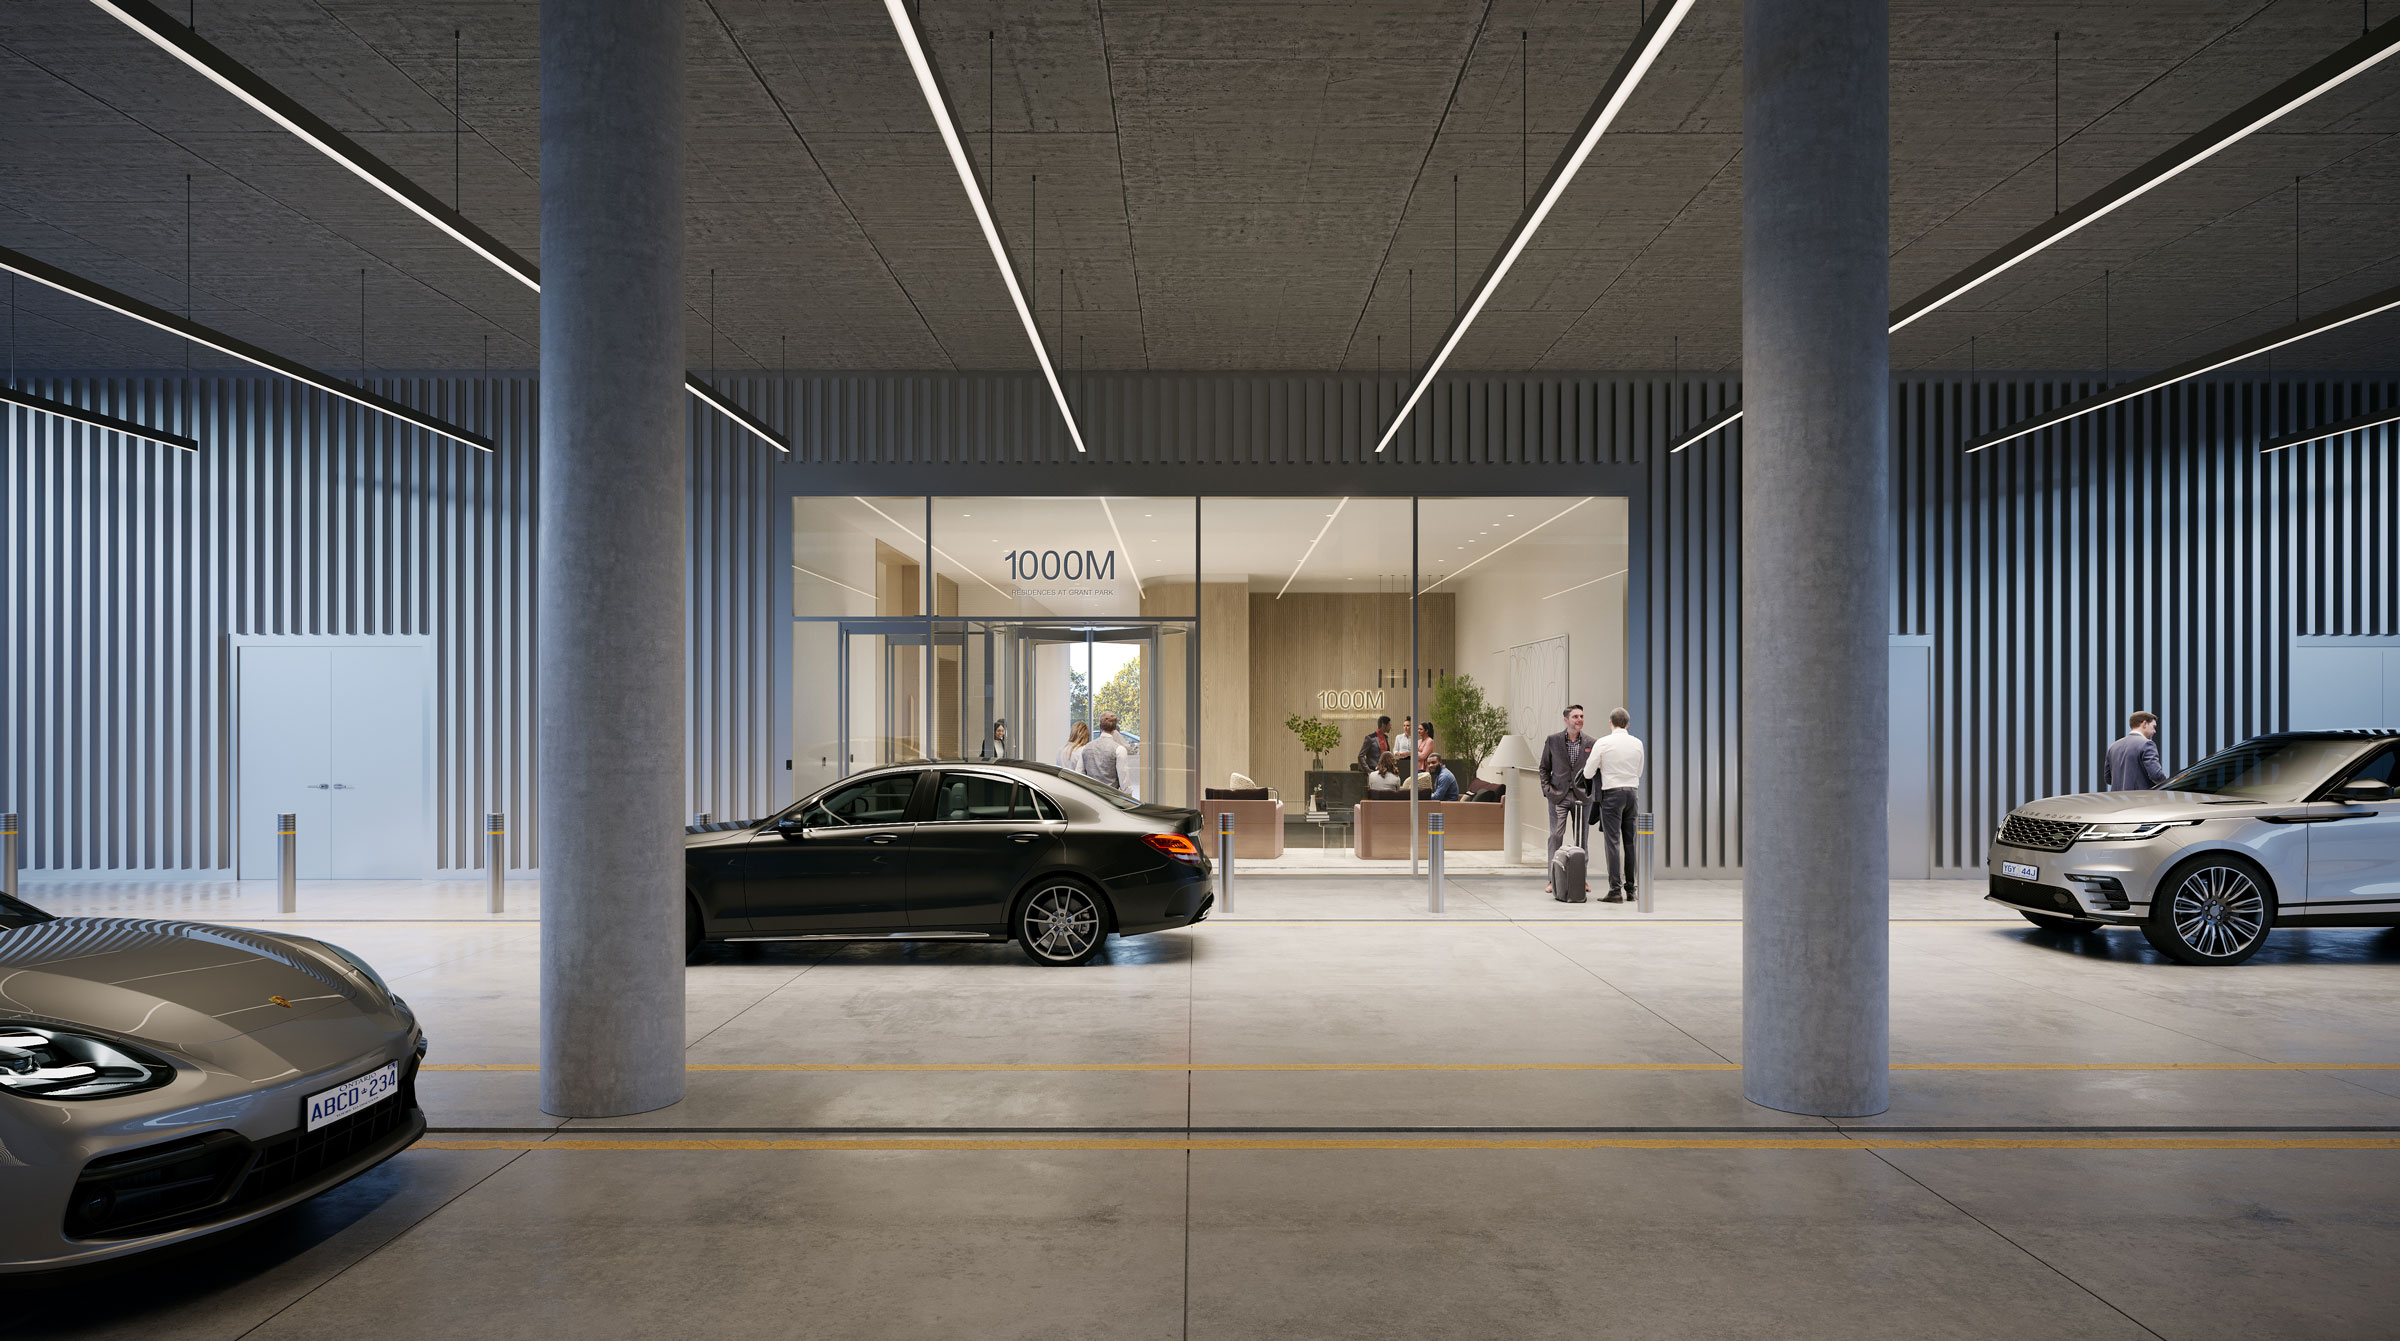 1000M Rental Residences Porte Cochere covered entrance with luxury cars 